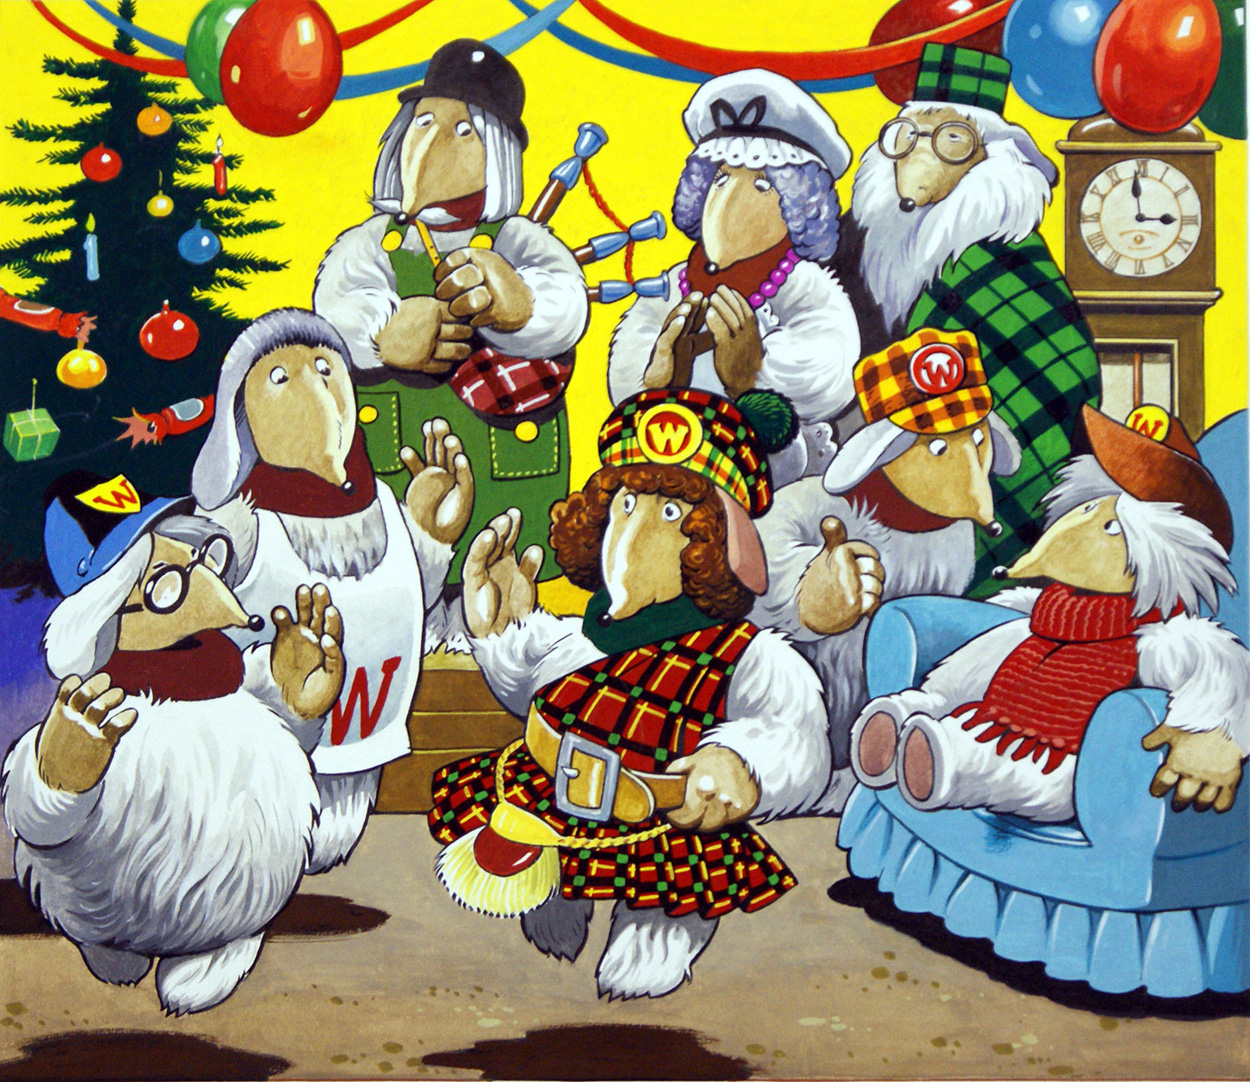 The Wombles: A Wombling Hogmanay (Original) art by The Wombles (Blasco) at The Illustration Art Gallery